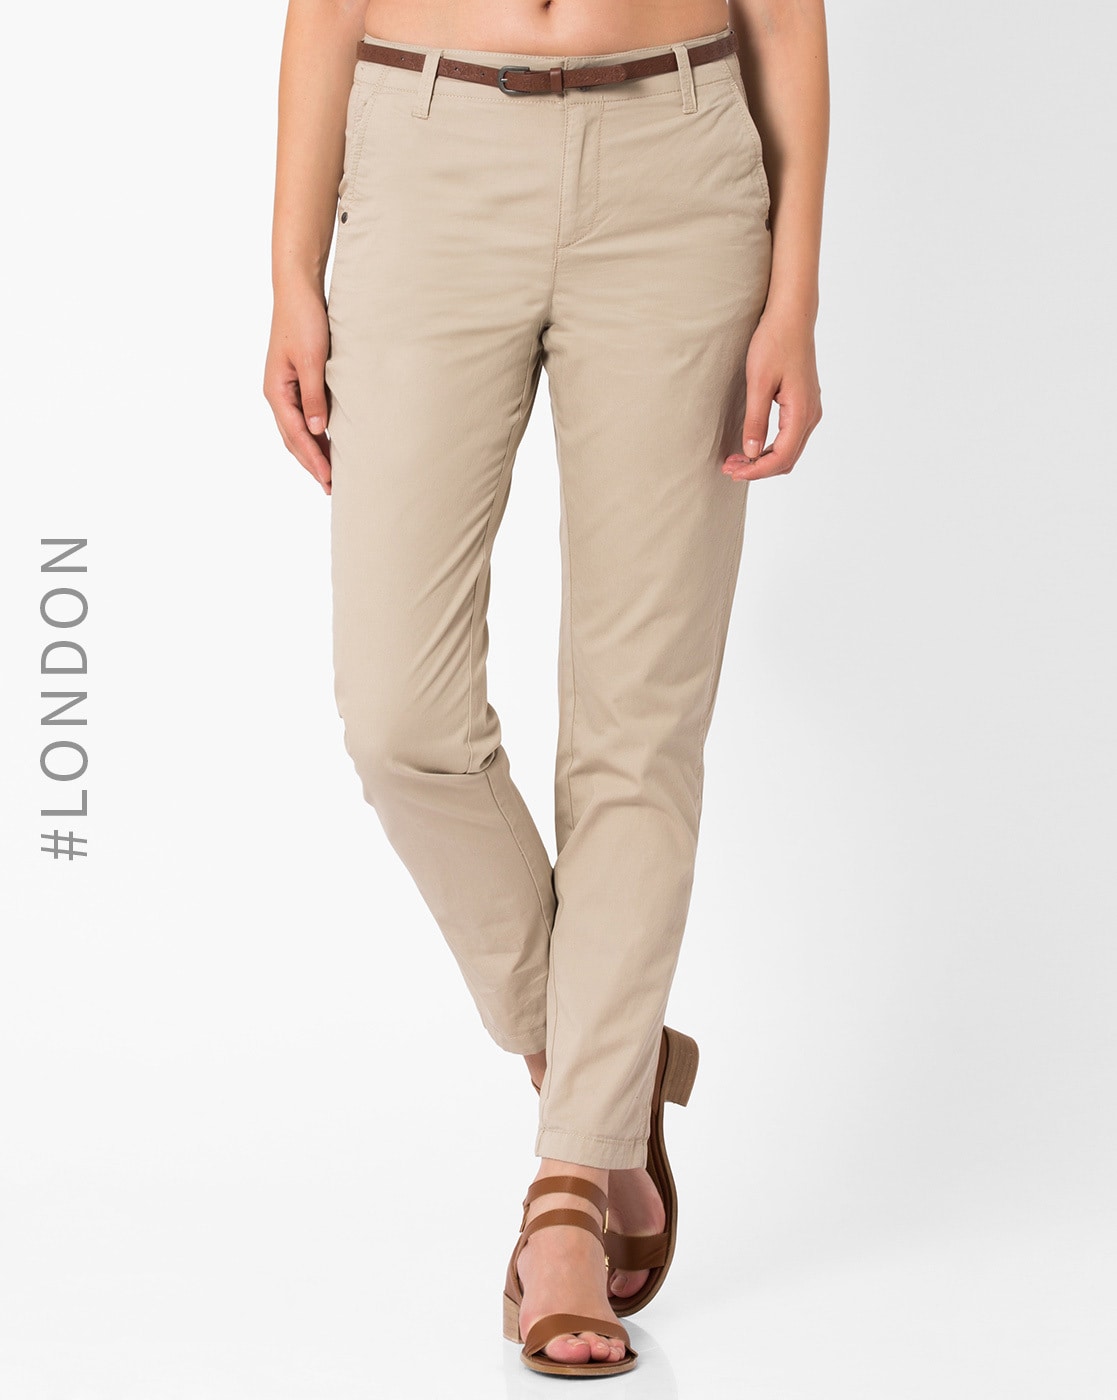 What to Wear with Chinos Complete Guide for Women  Chinos women outfit  Fashion Work outfits women